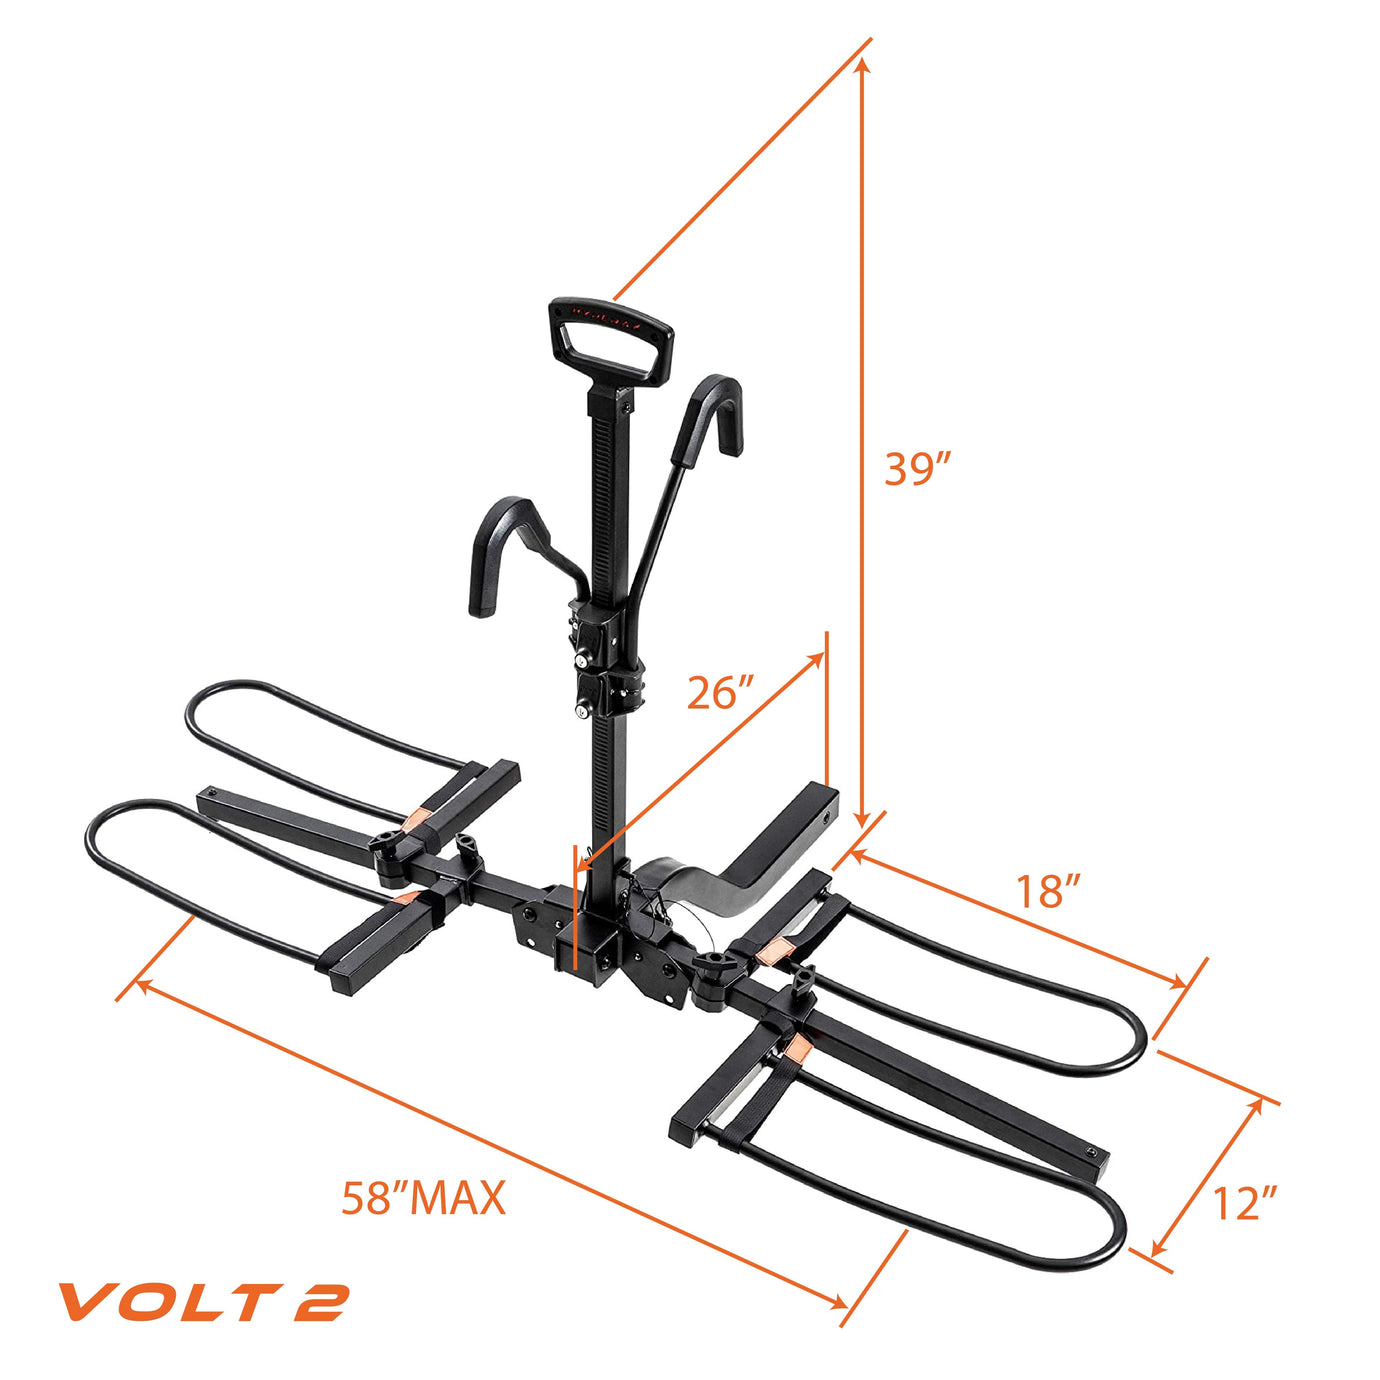 VOLT 2 with E-Bike Adapter Combo Series